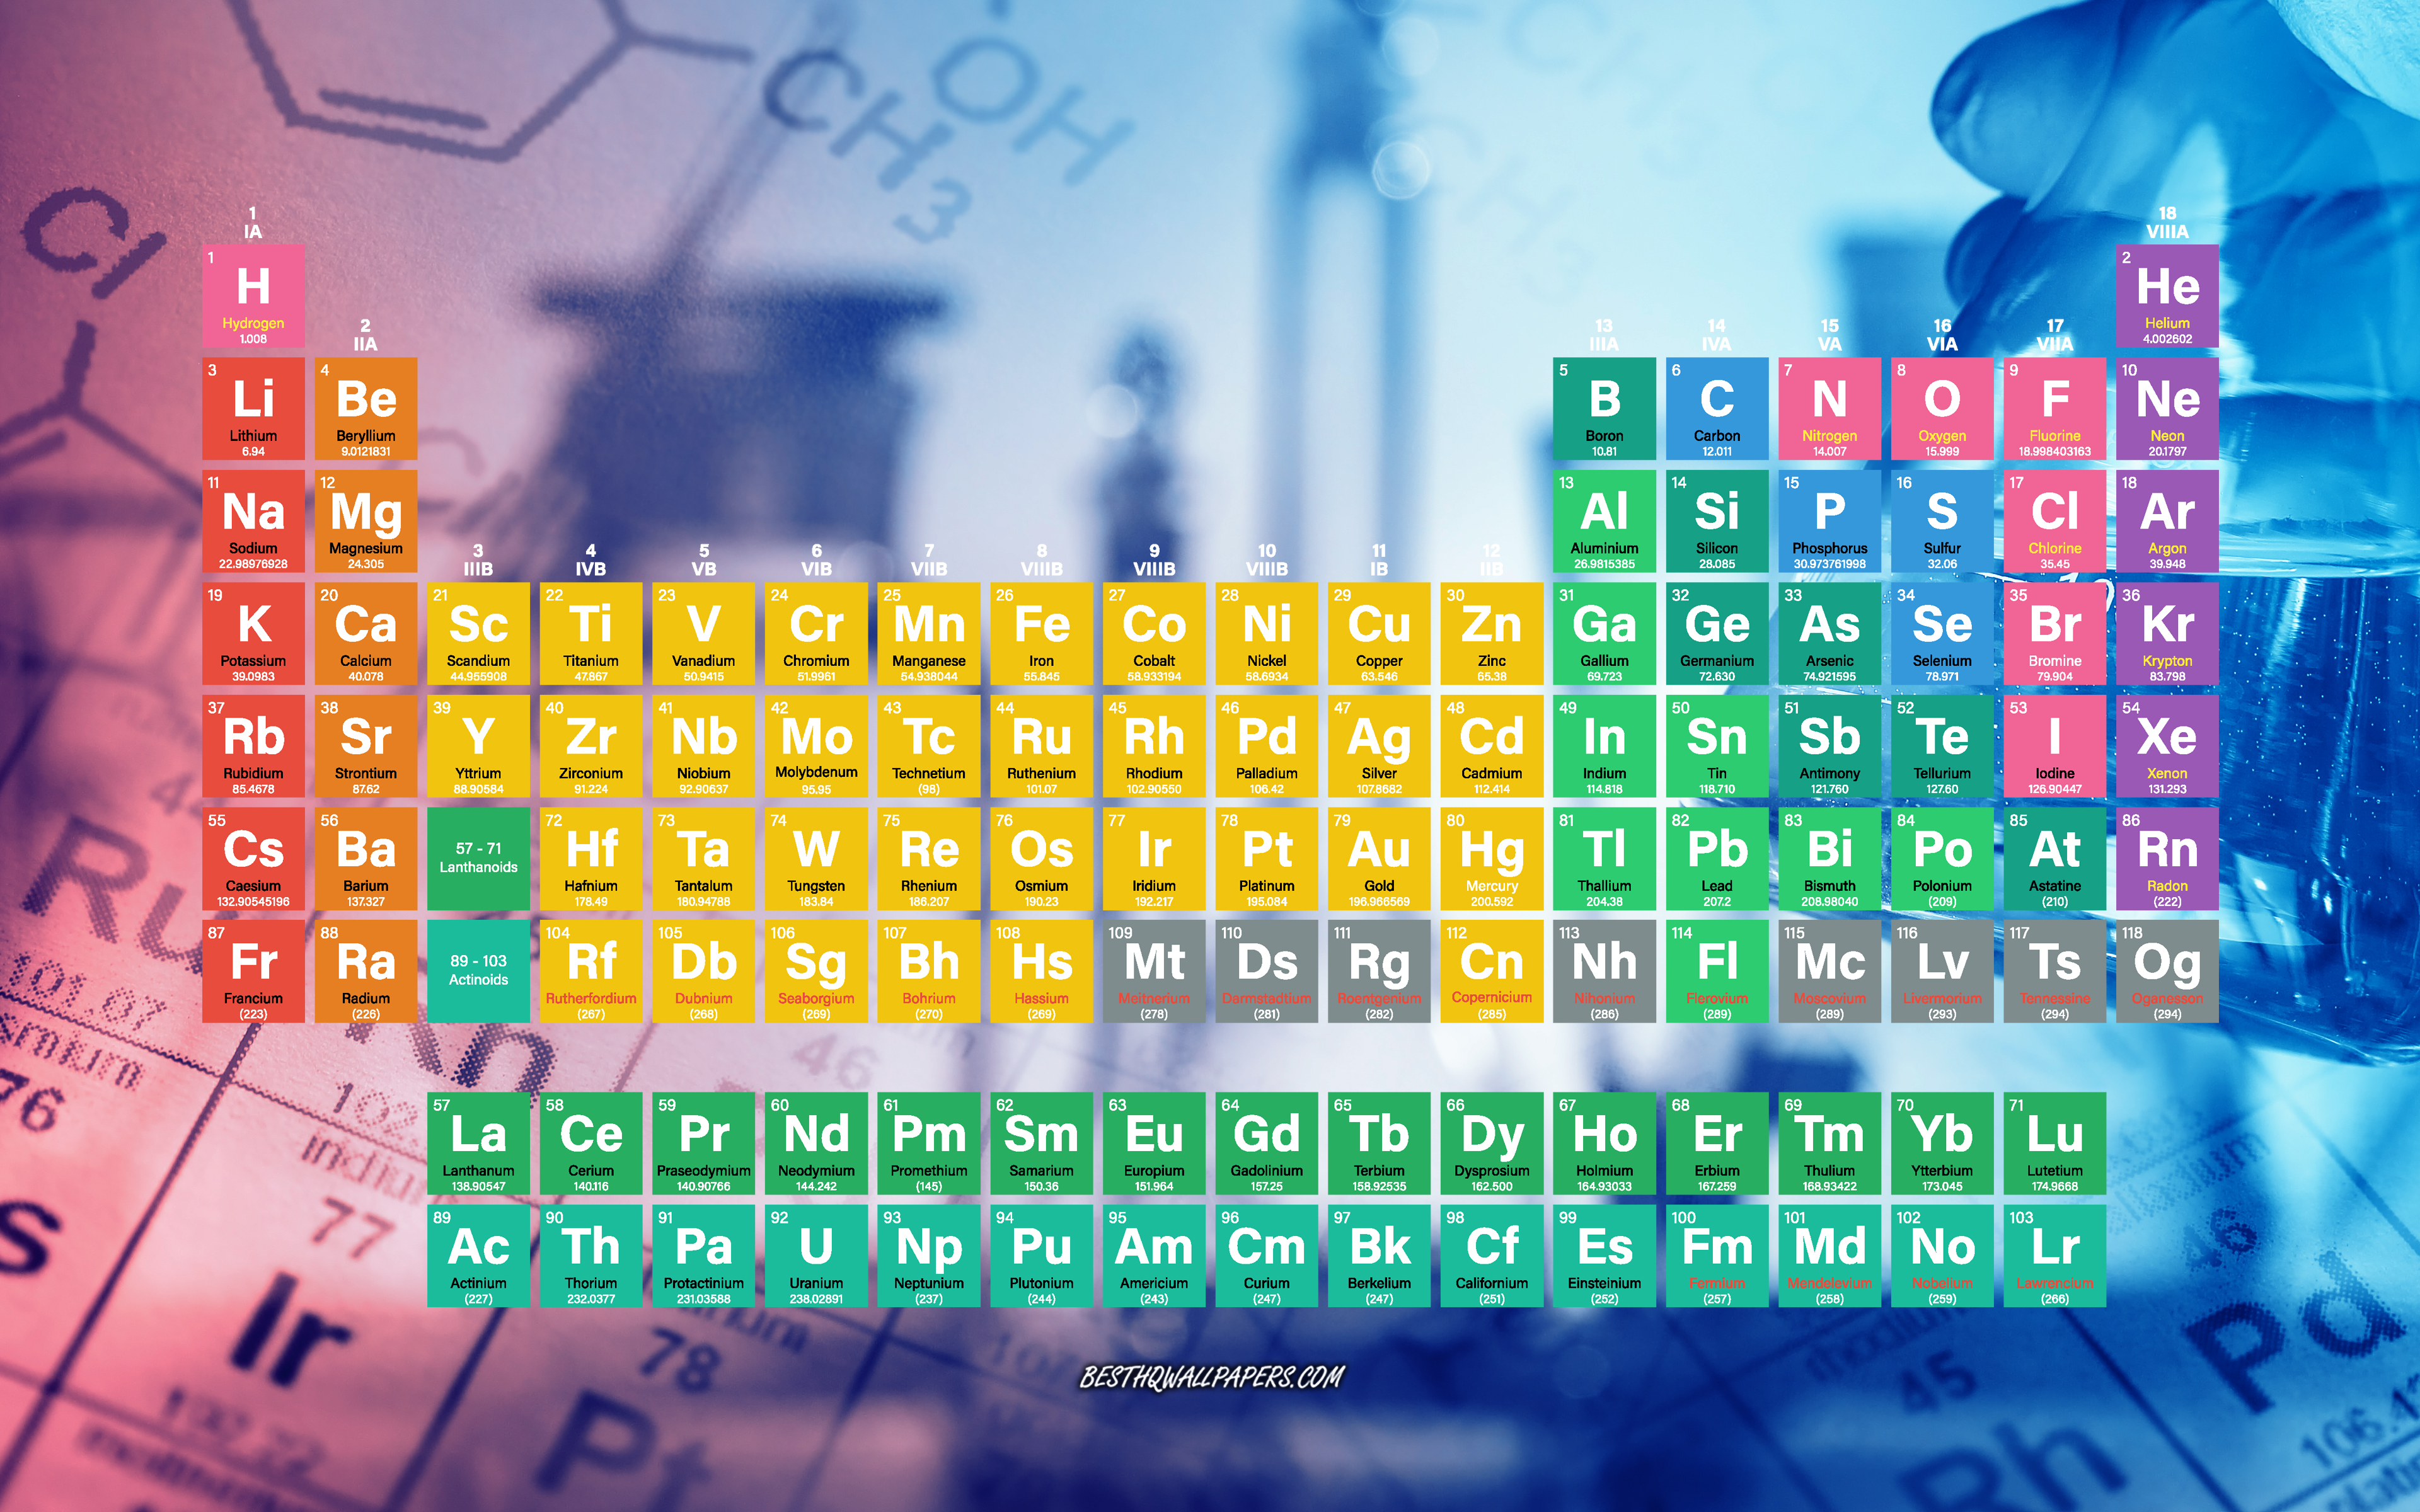 Download wallpaper Periodic table, chemical elements, 4k, Mendeleev table, chemistry background, chemistry concepts for desktop with resolution 3840x2400. High Quality HD picture wallpaper